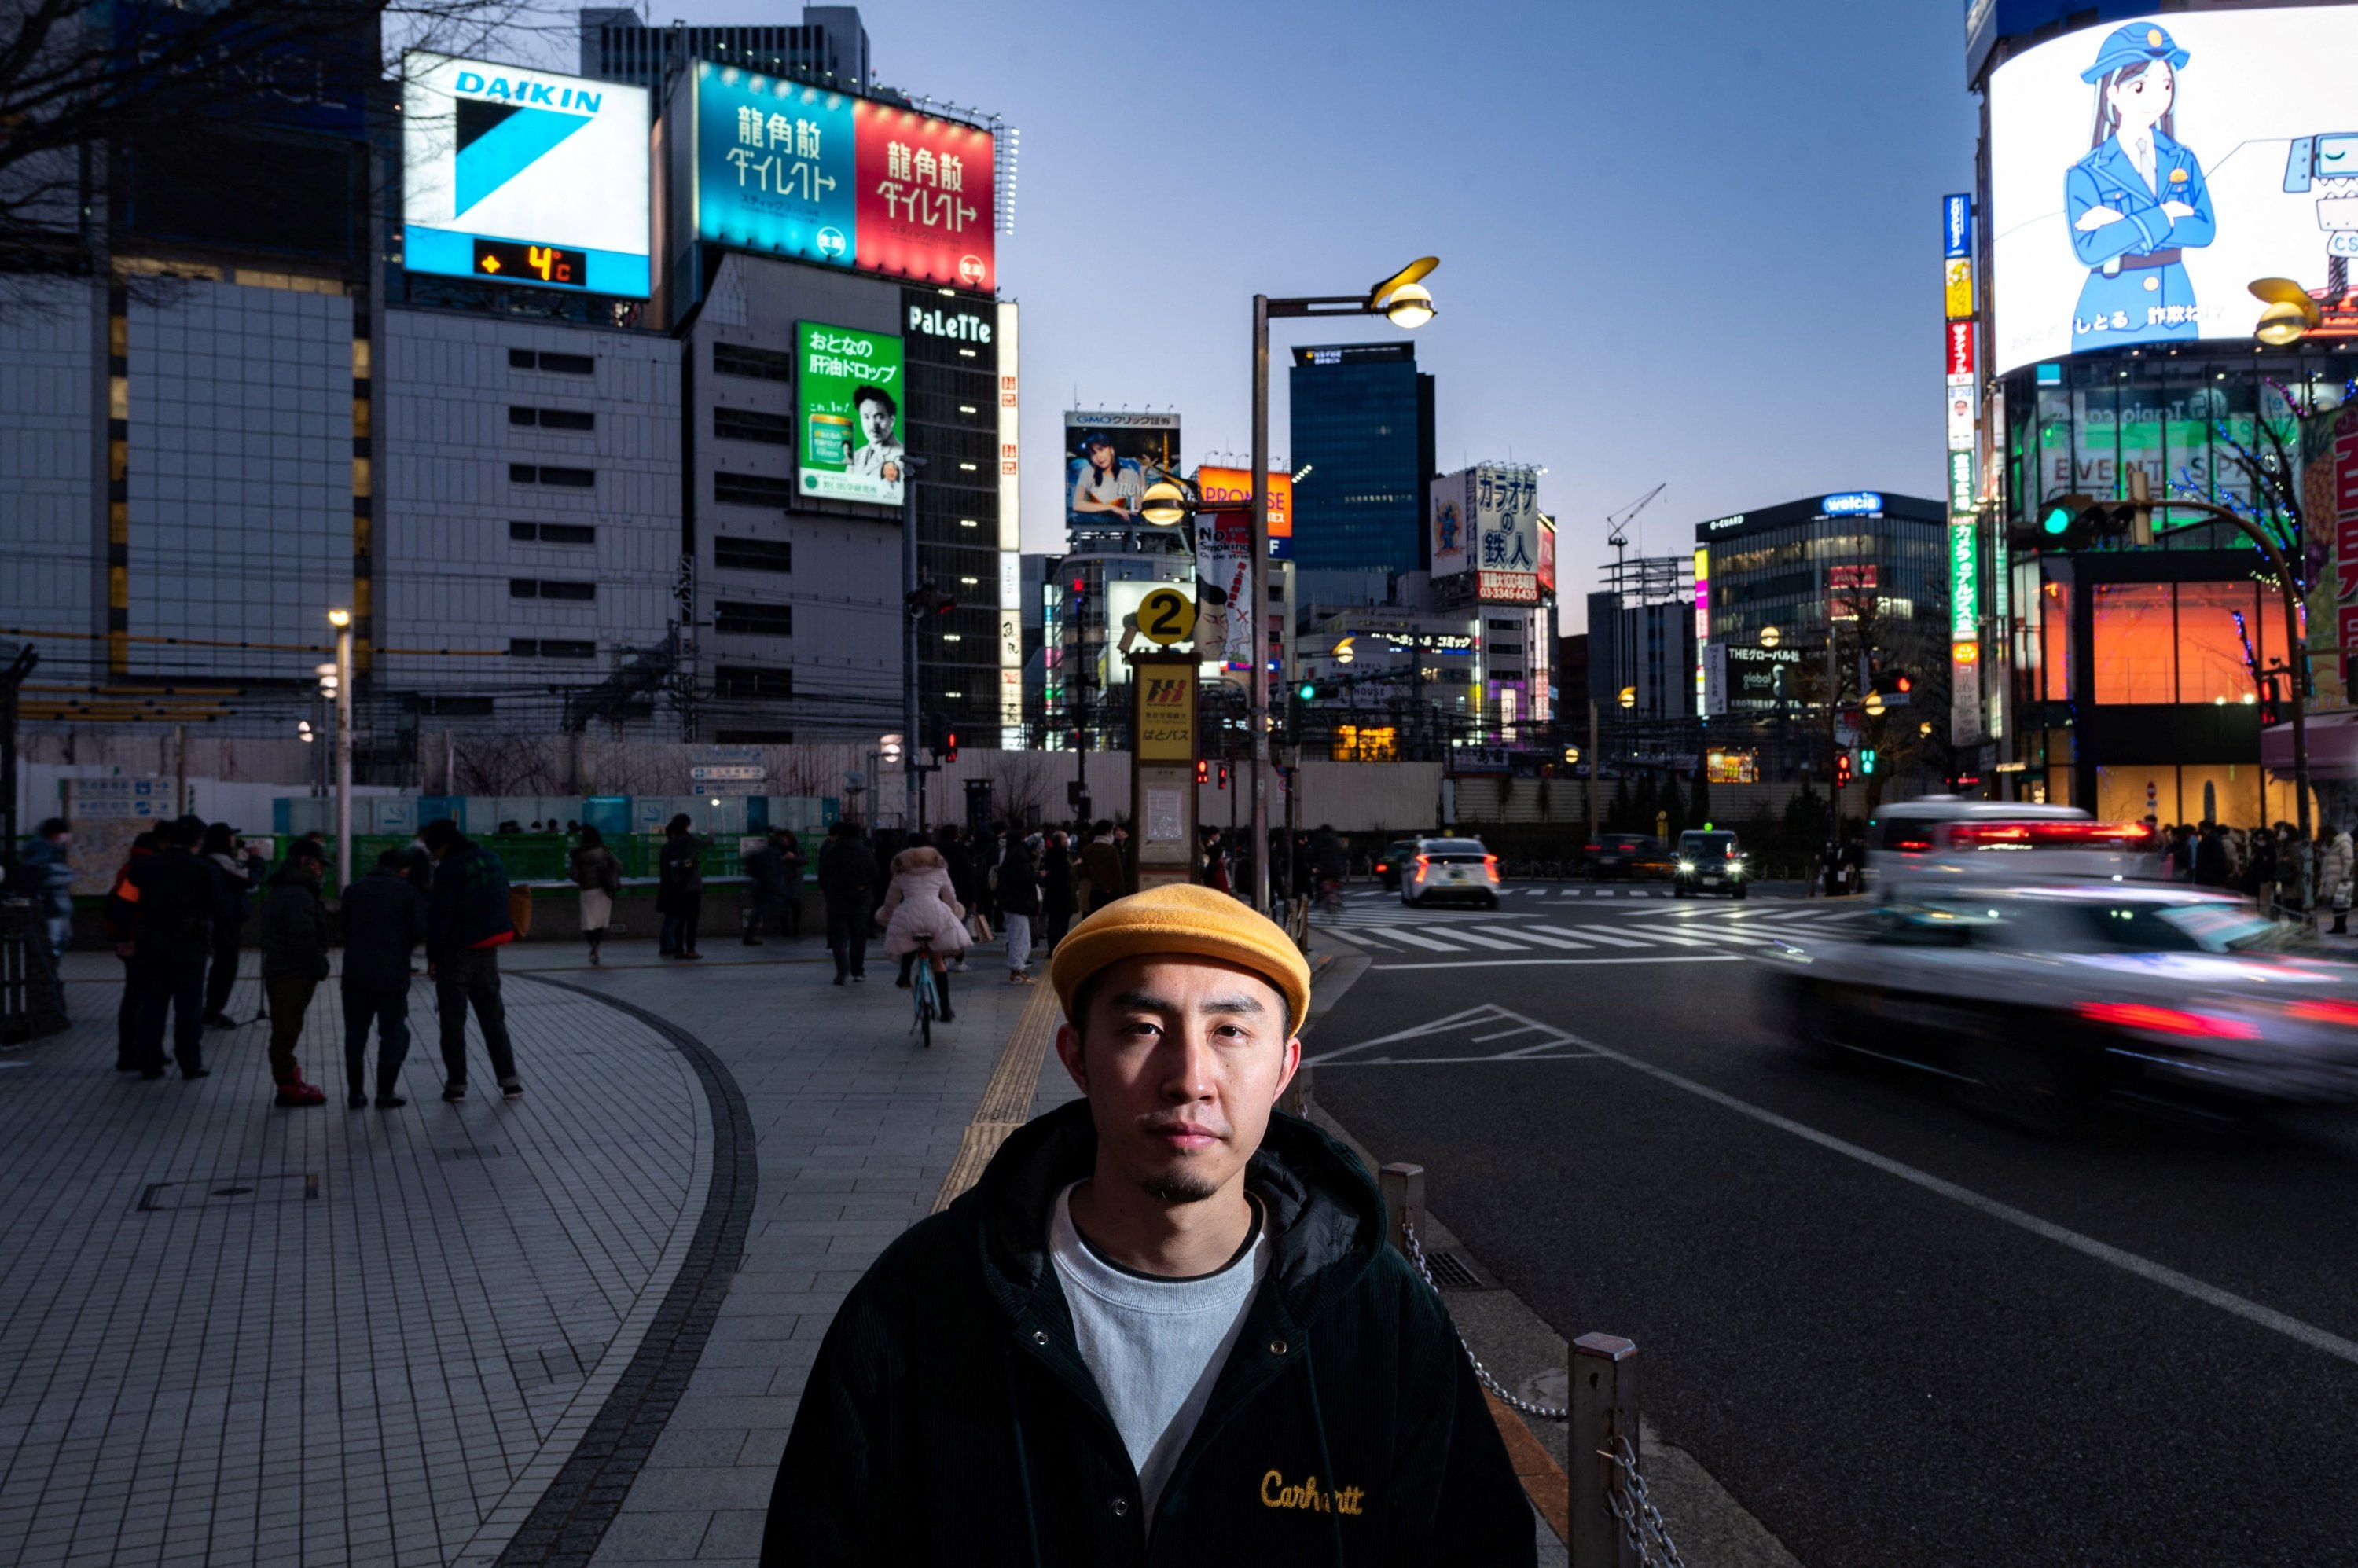 DJ Kei Notoya, who has collected around City Pop 3,000 records, poses for a photo in the Shinjuku district of Tokyo, Japan, Feb. 6, 2022. (AFP)